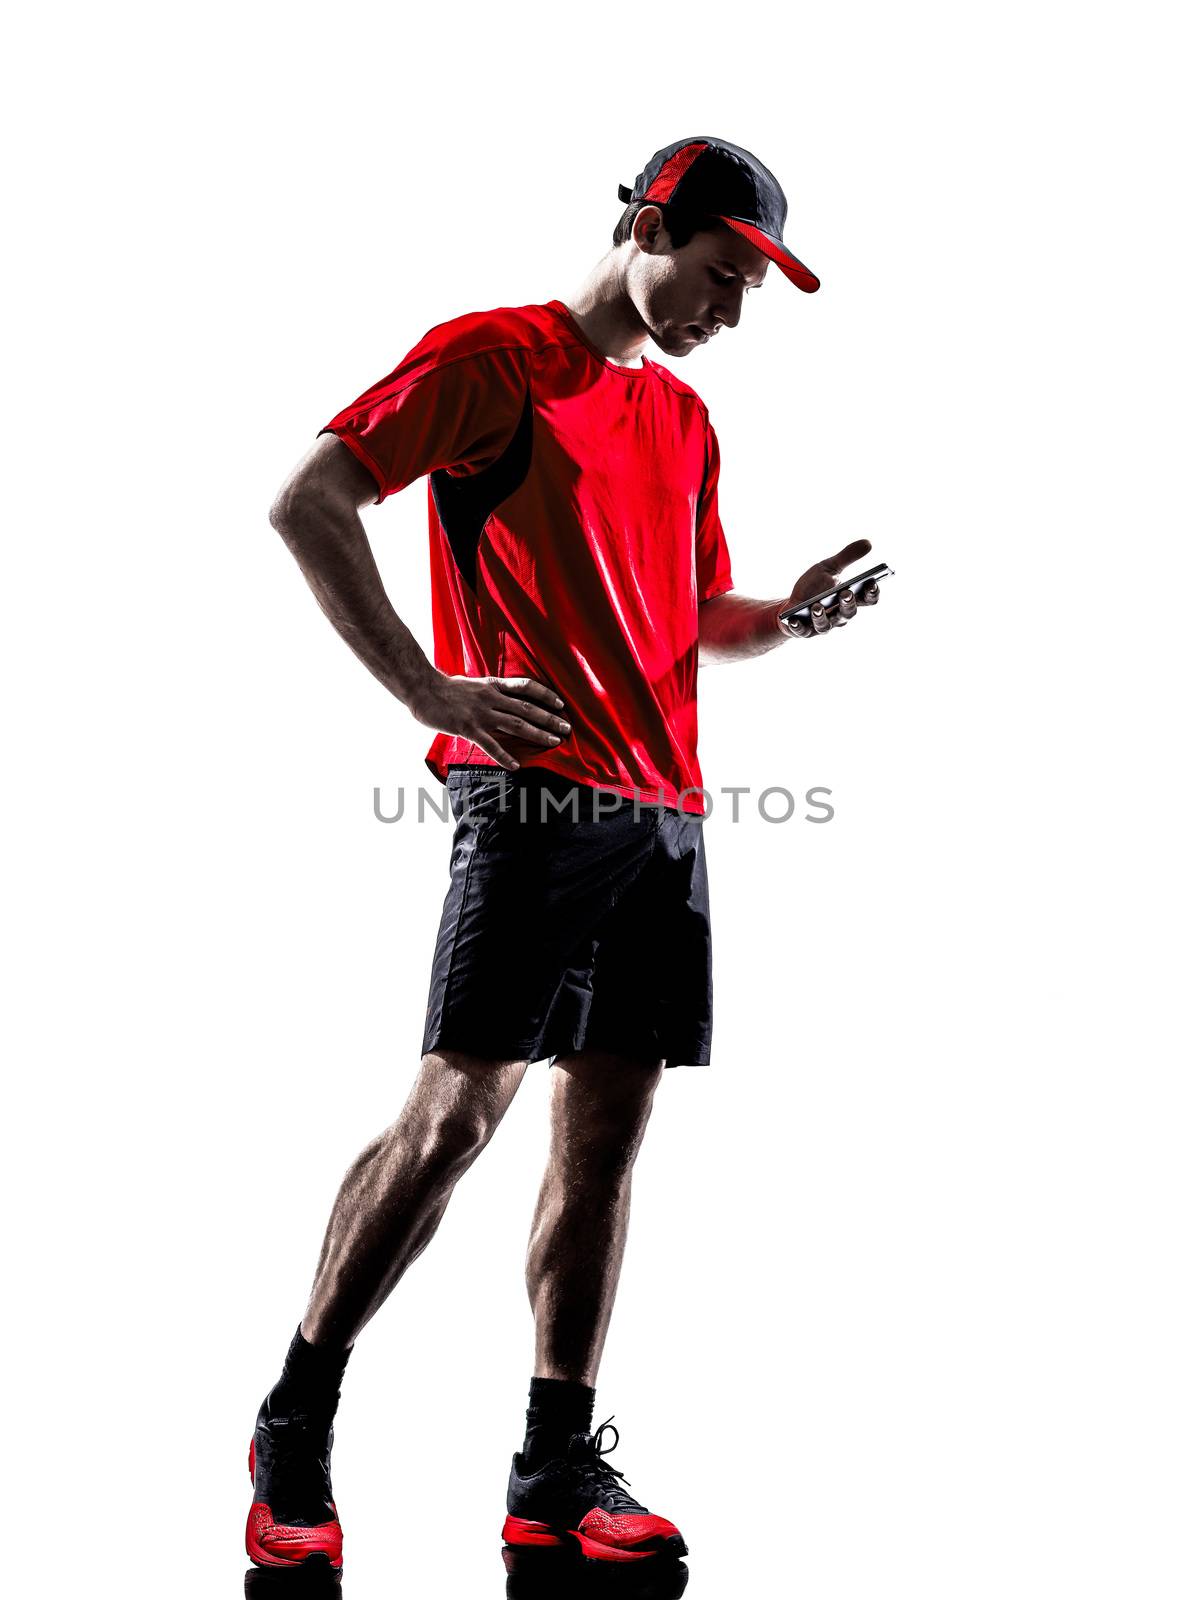 one young man runners joggers using smartphones headphones in silhouettes isolated on white background